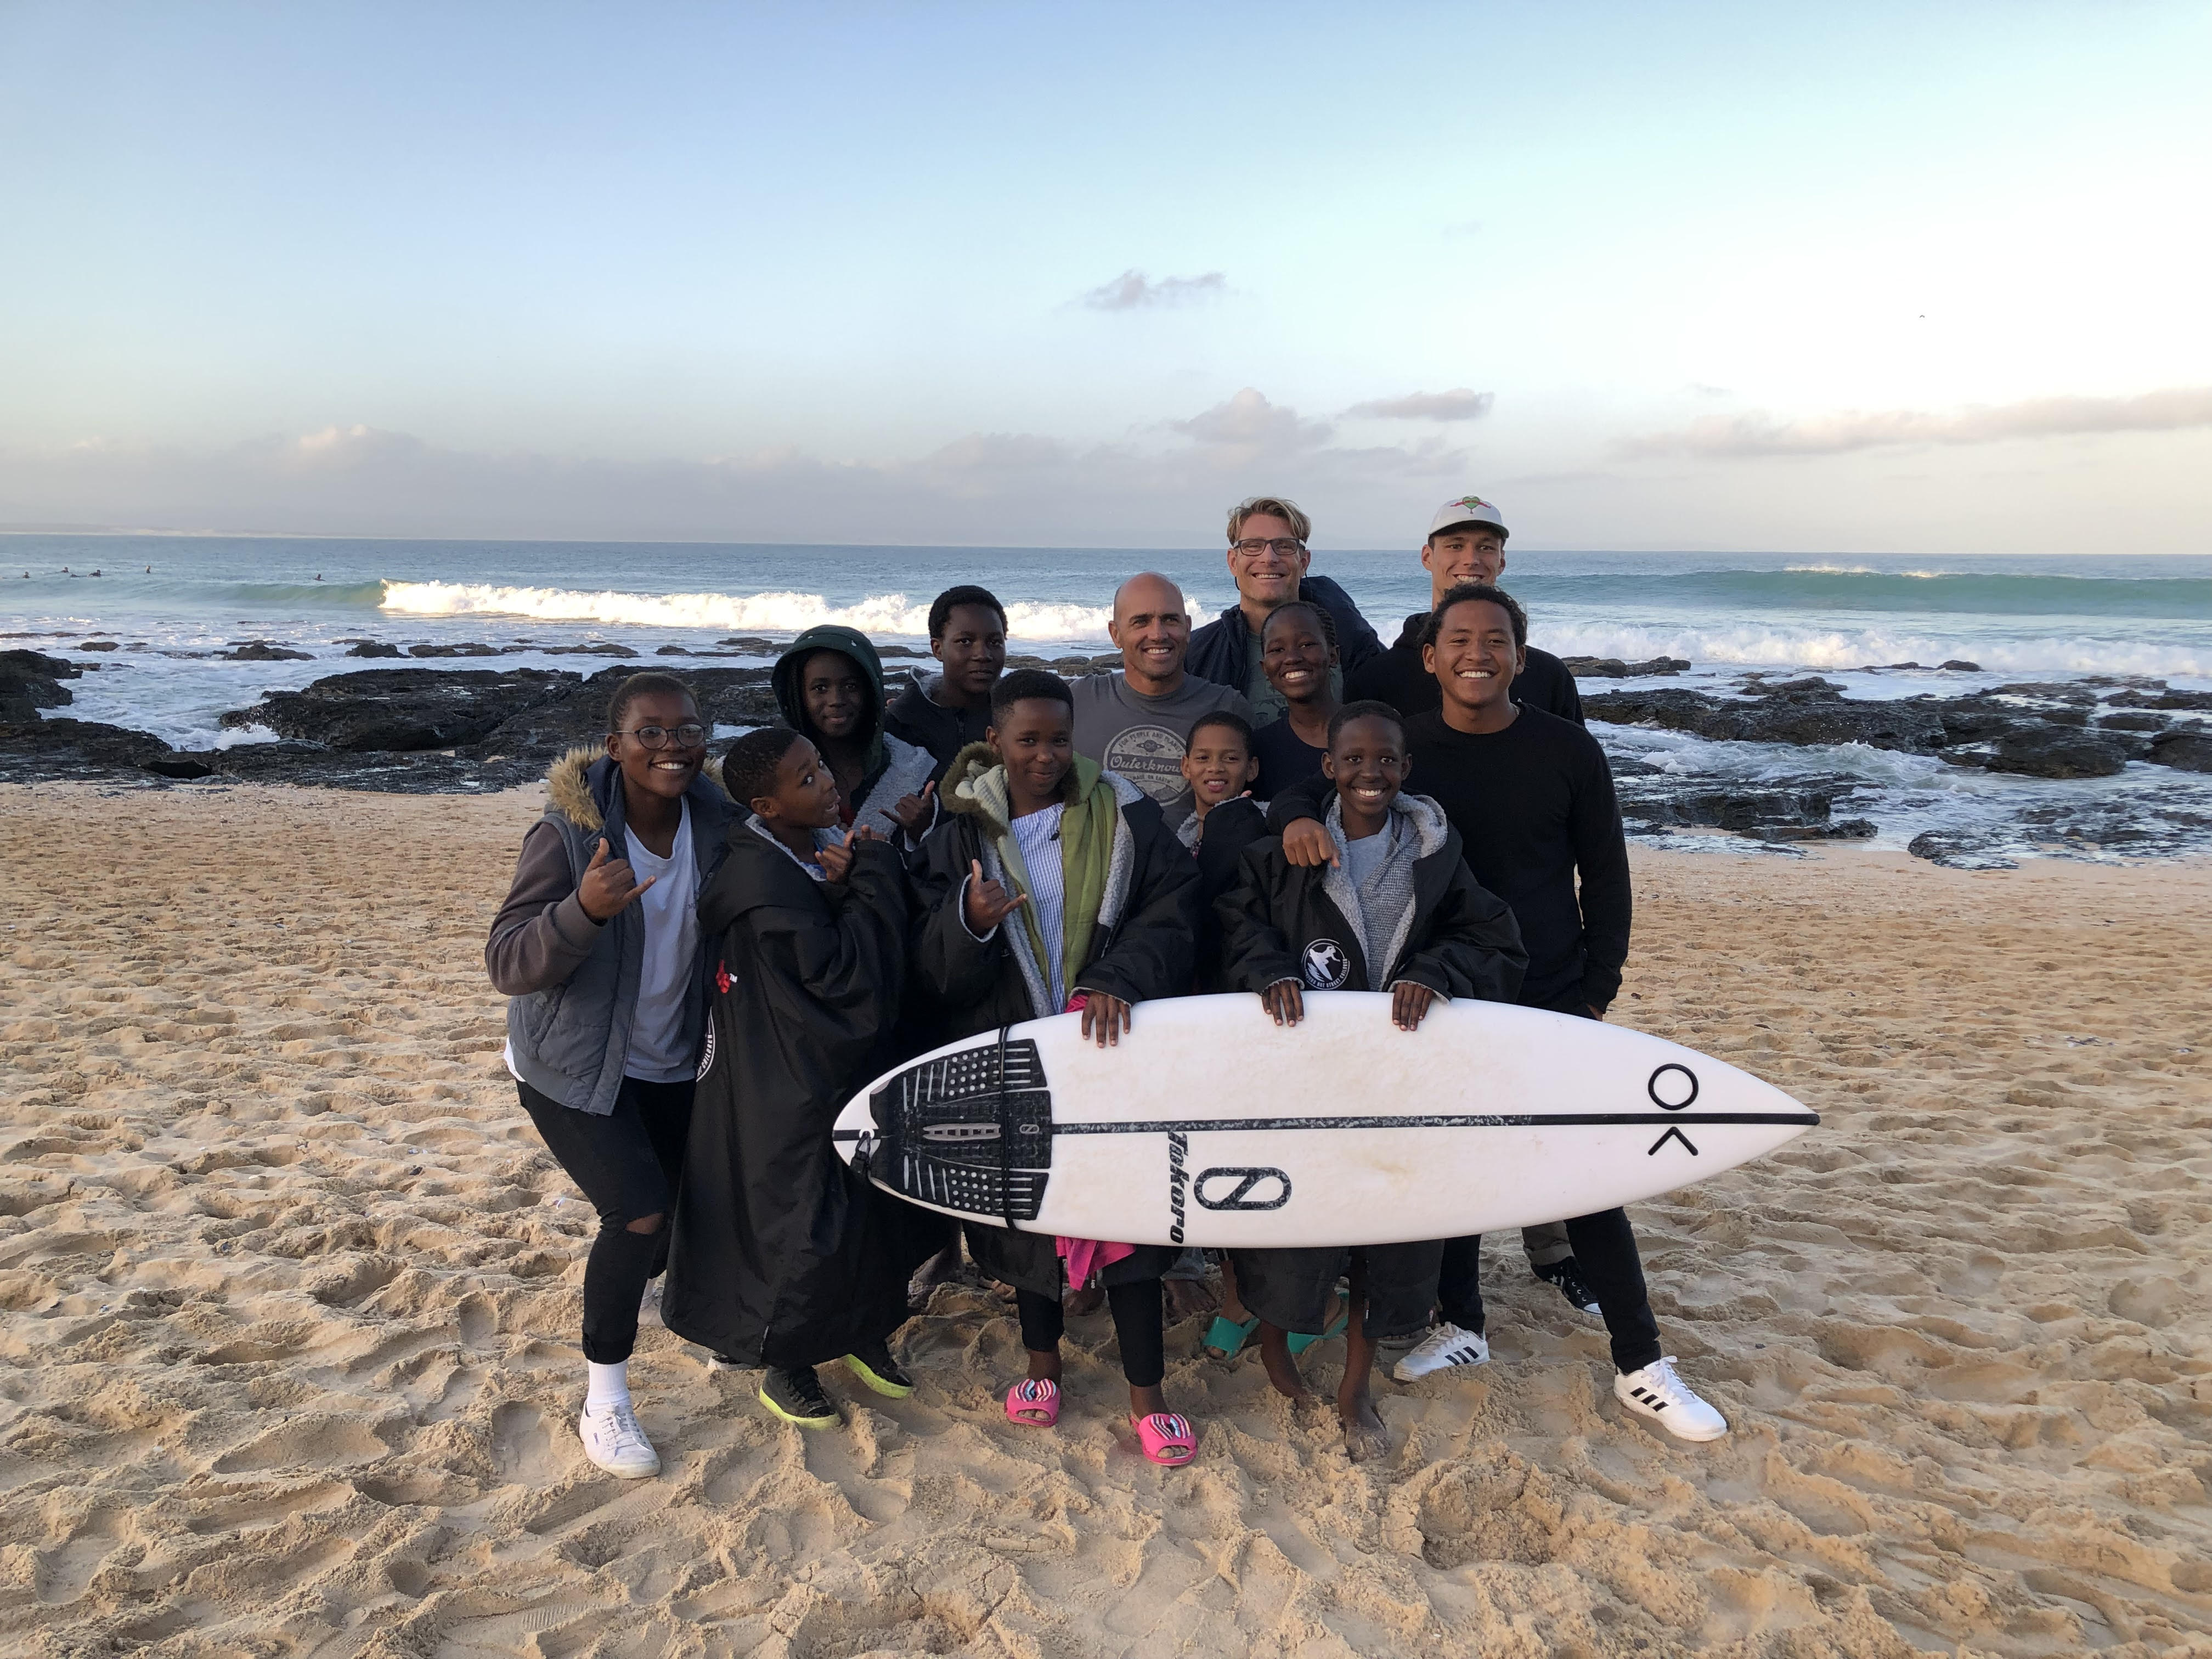 Surfers Not Street Children at the J Bay Open 2019